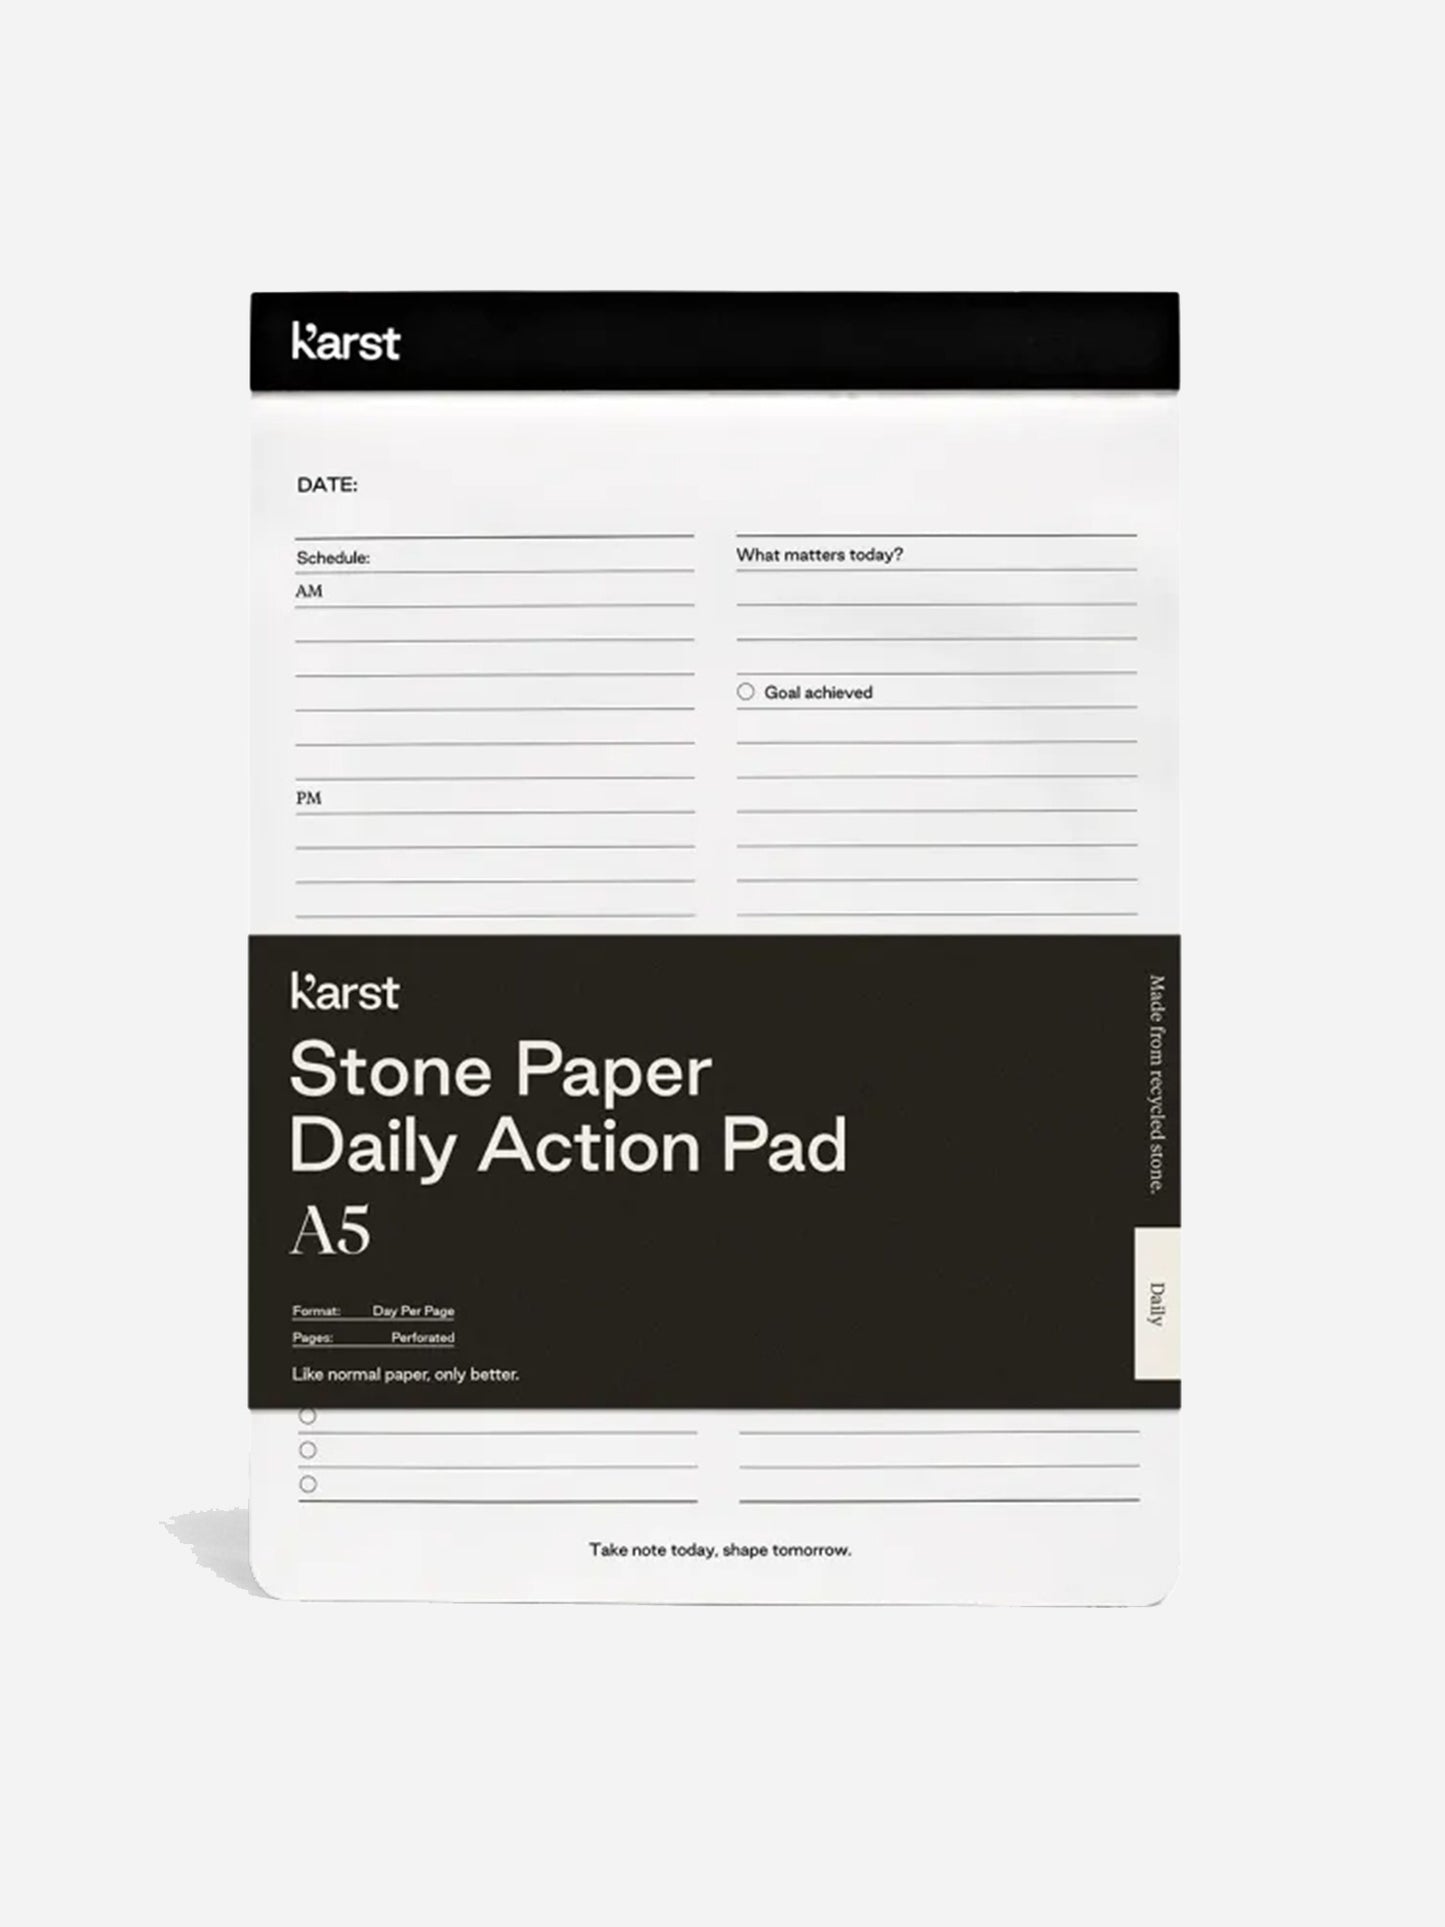 Karst Stone Paper A5 Daily Action Pad